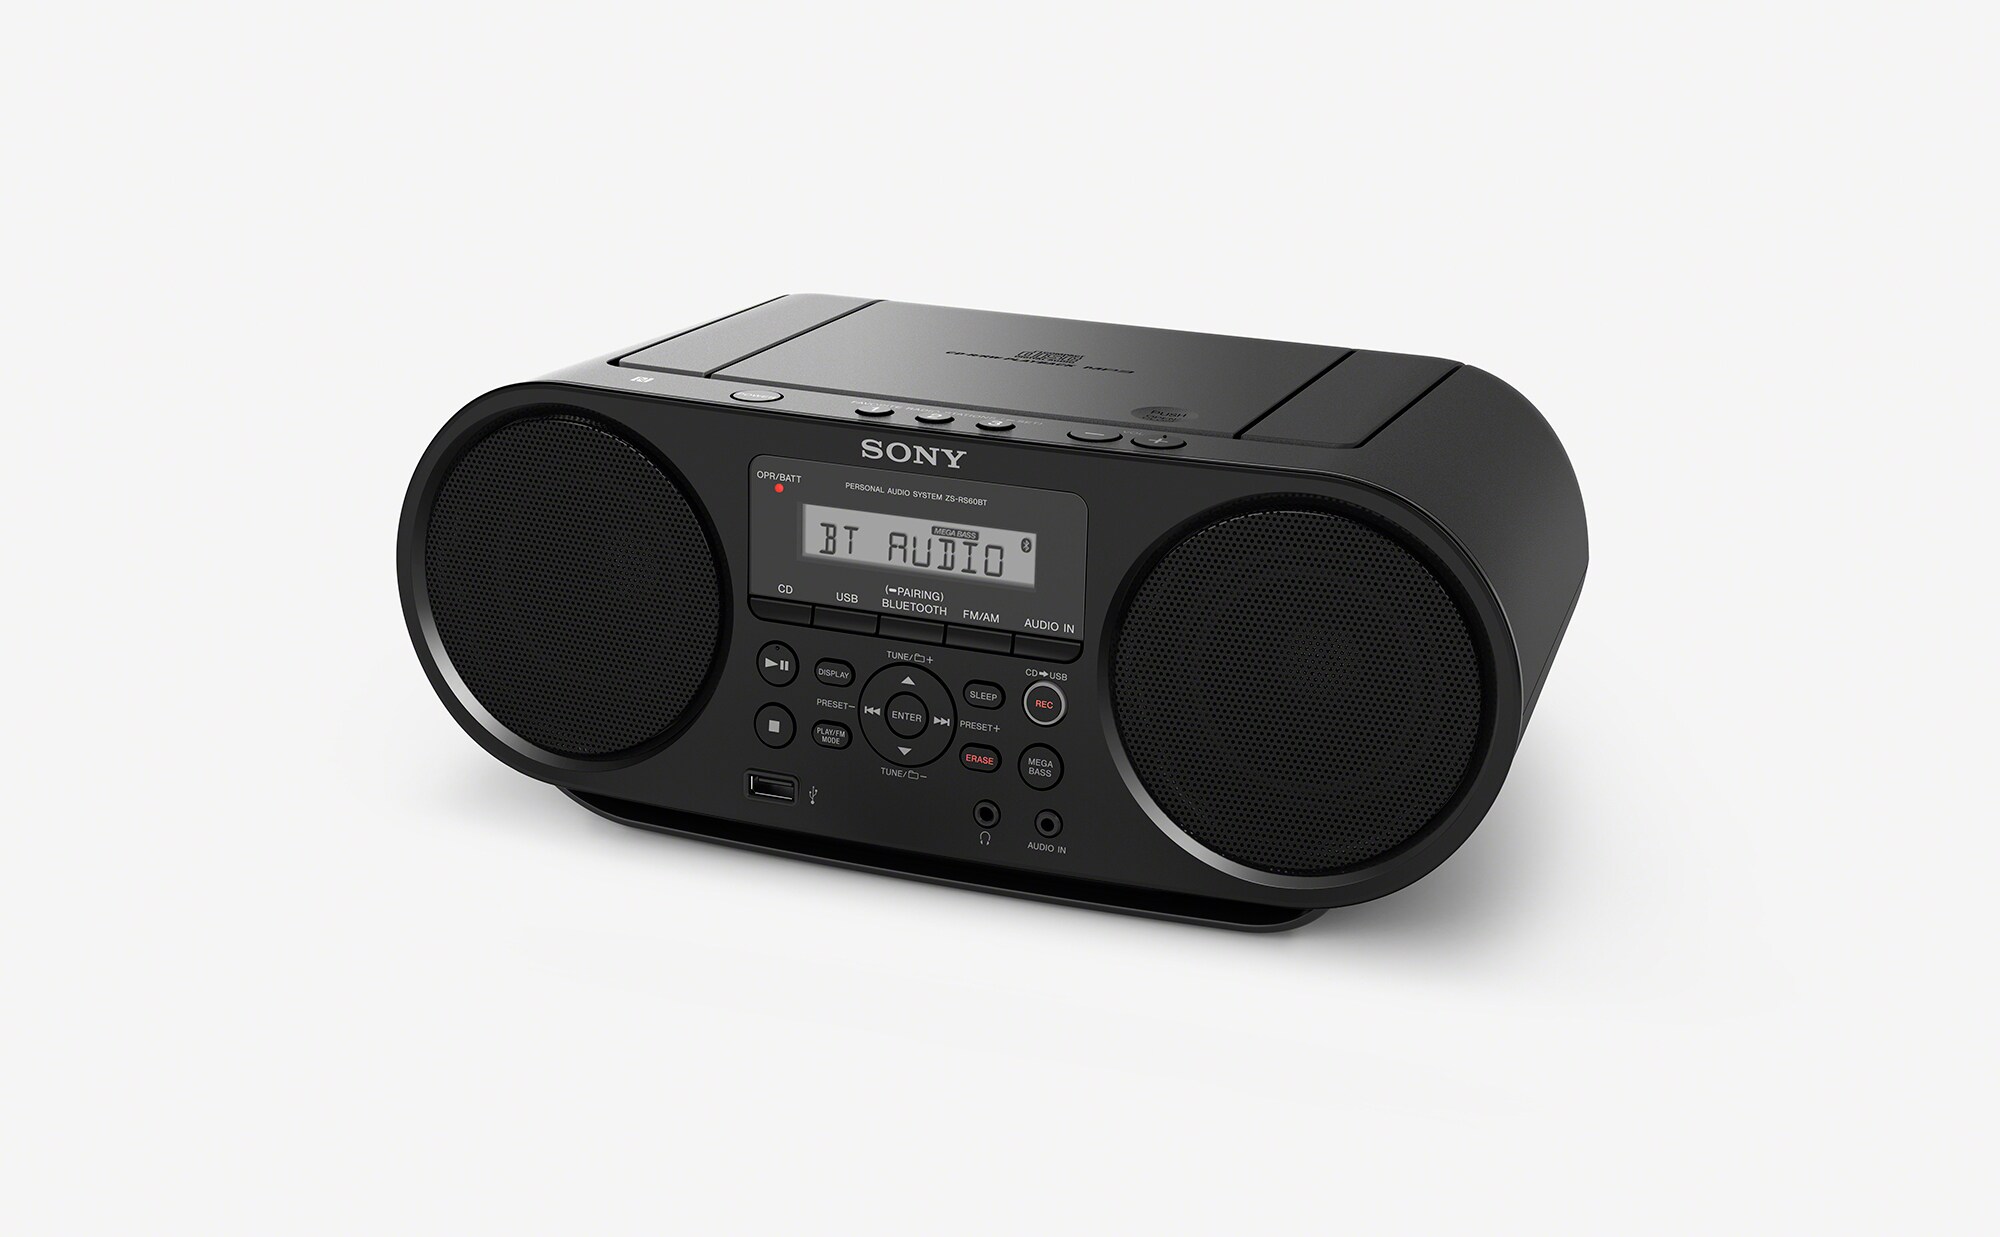 Sony Black CD Player Boombox with AM/FM Radio, Bluetooth, USB, and